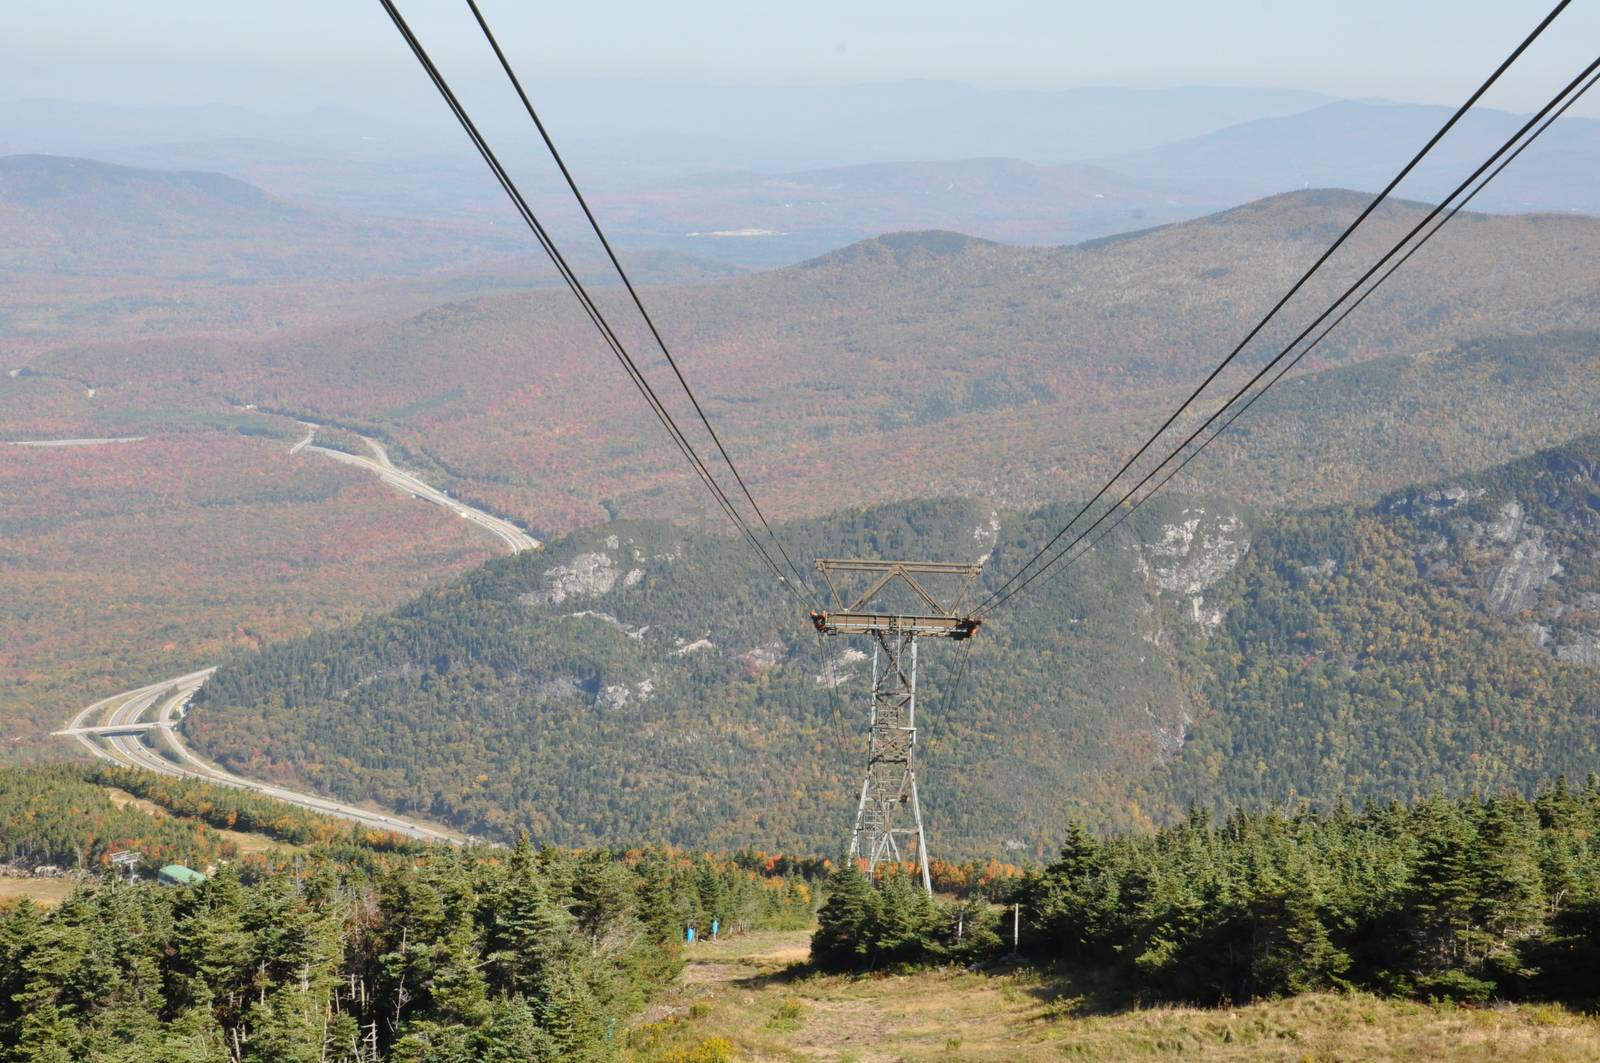 Fall Colors view from Cannon Mountain Aerial Tramway at the White Mountain National Forest in New Hampshire